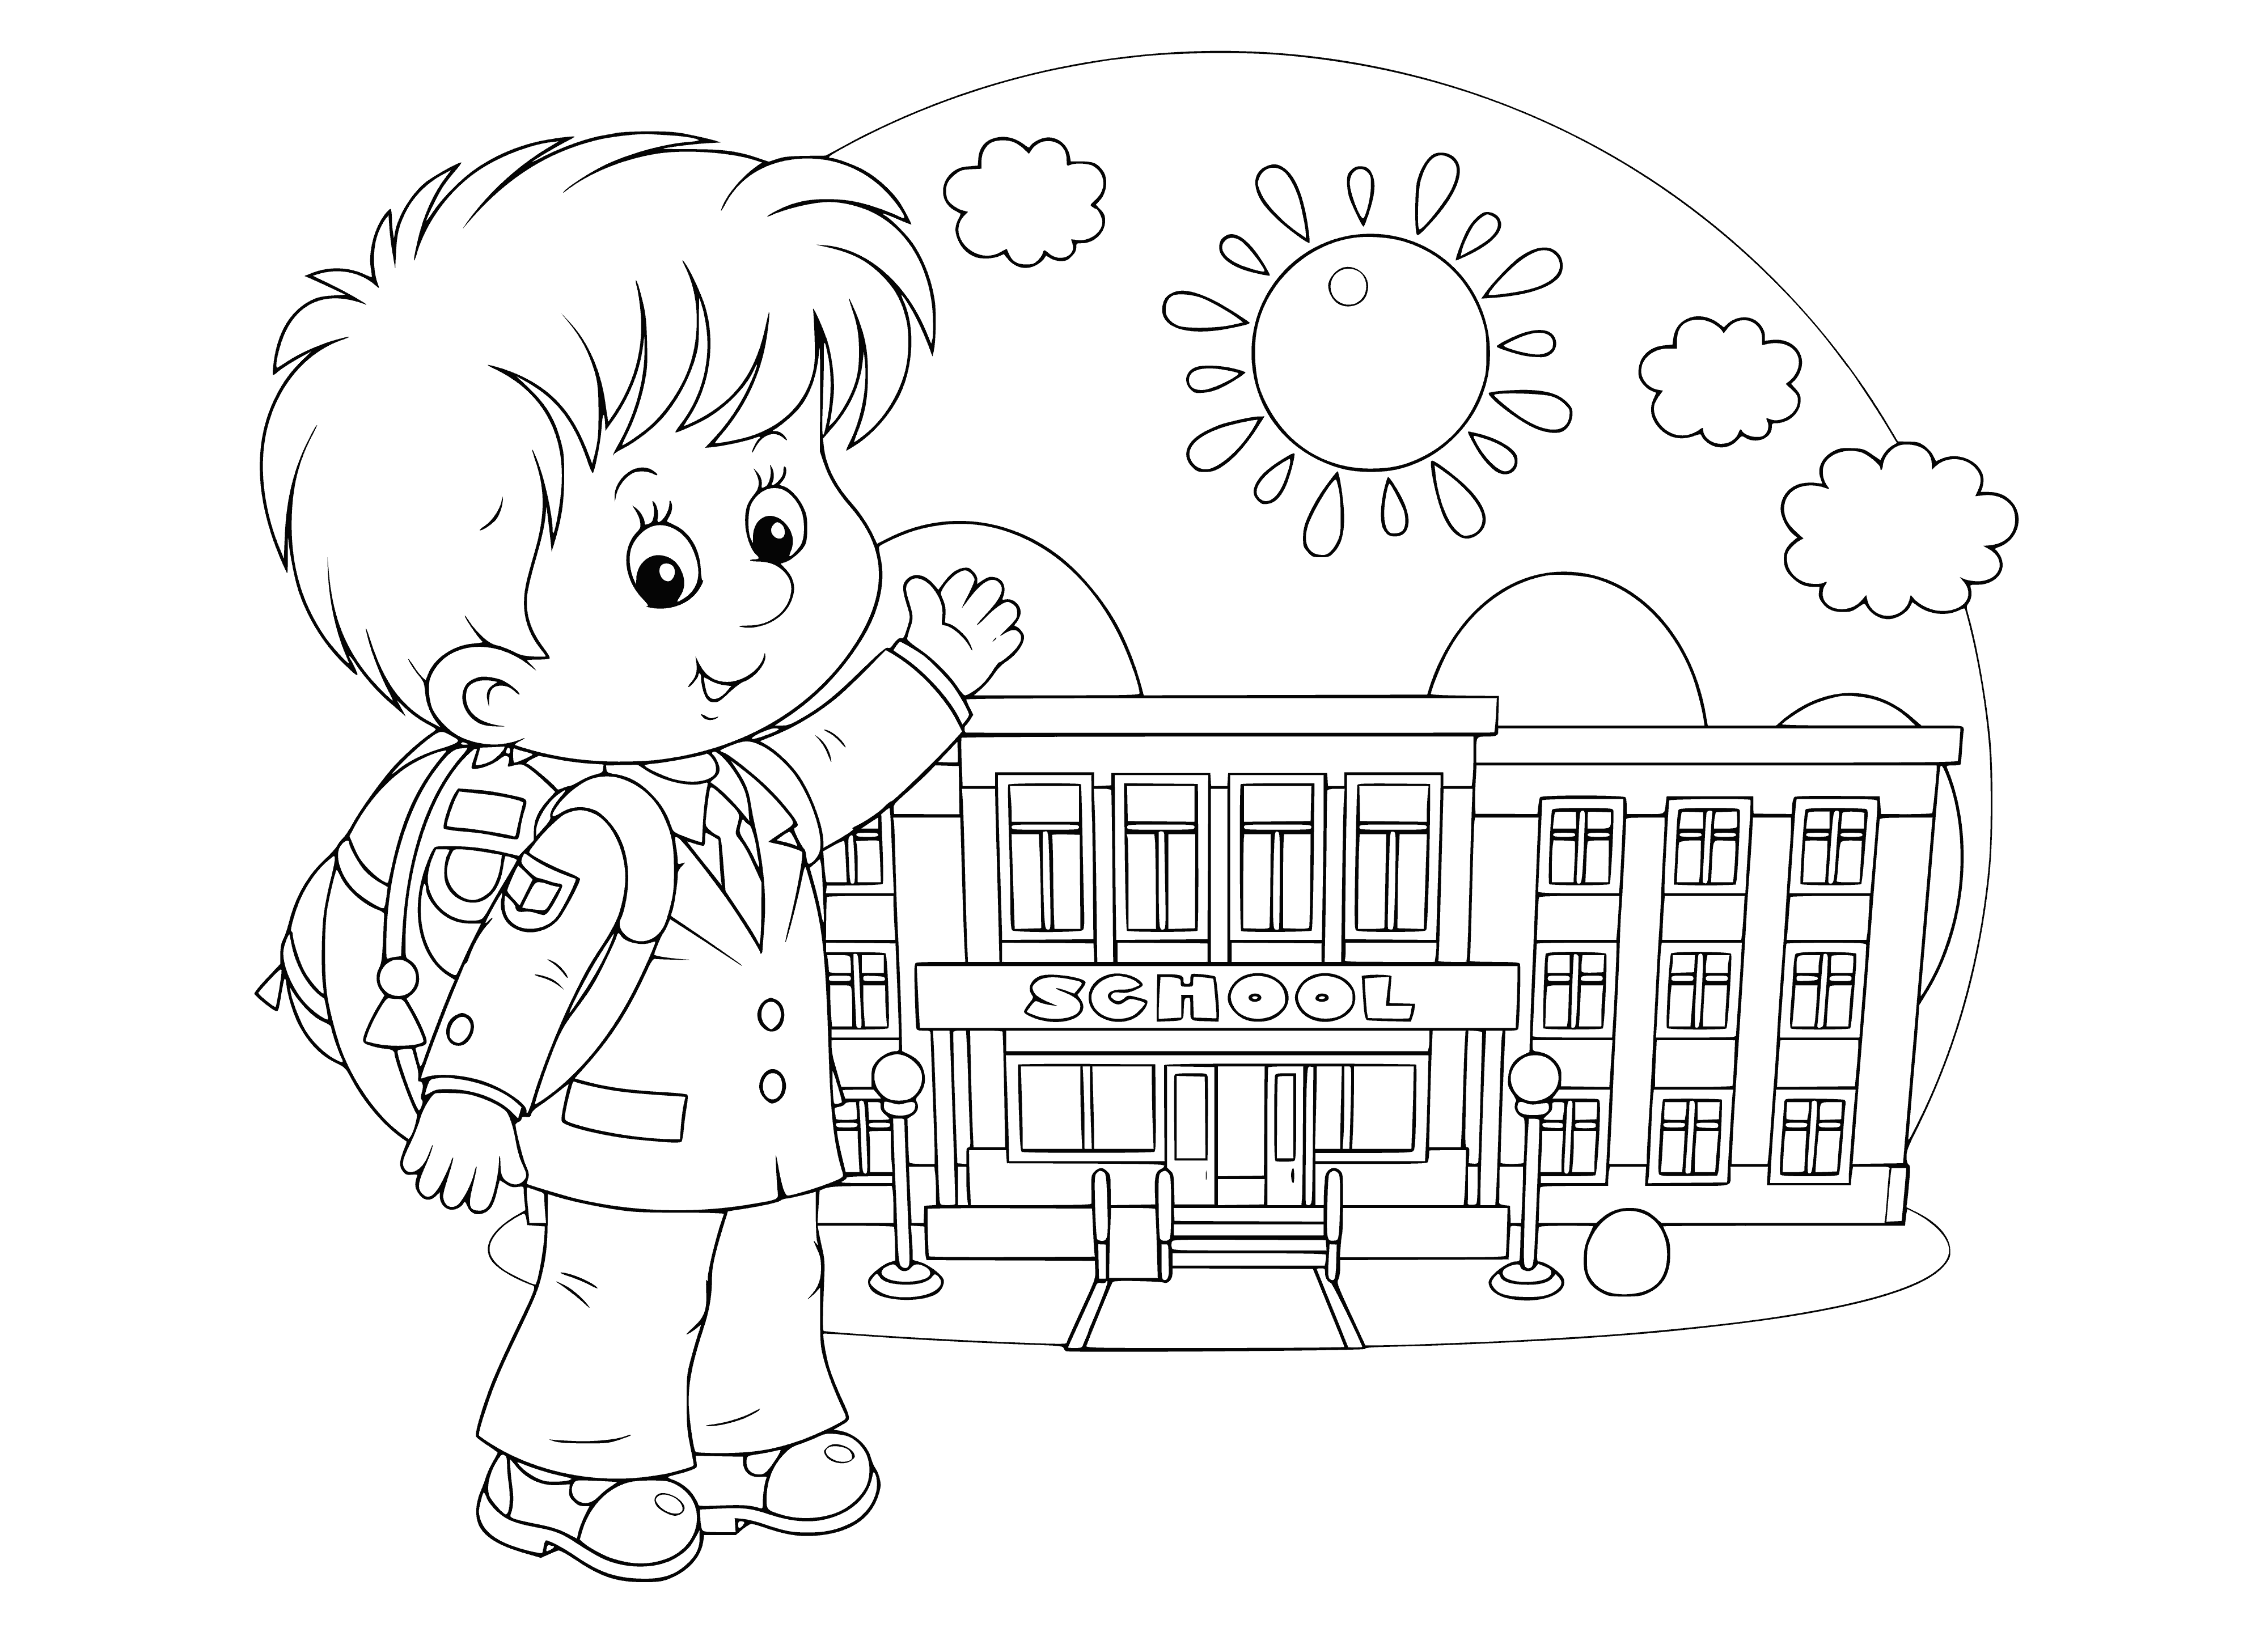 First grader coloring page